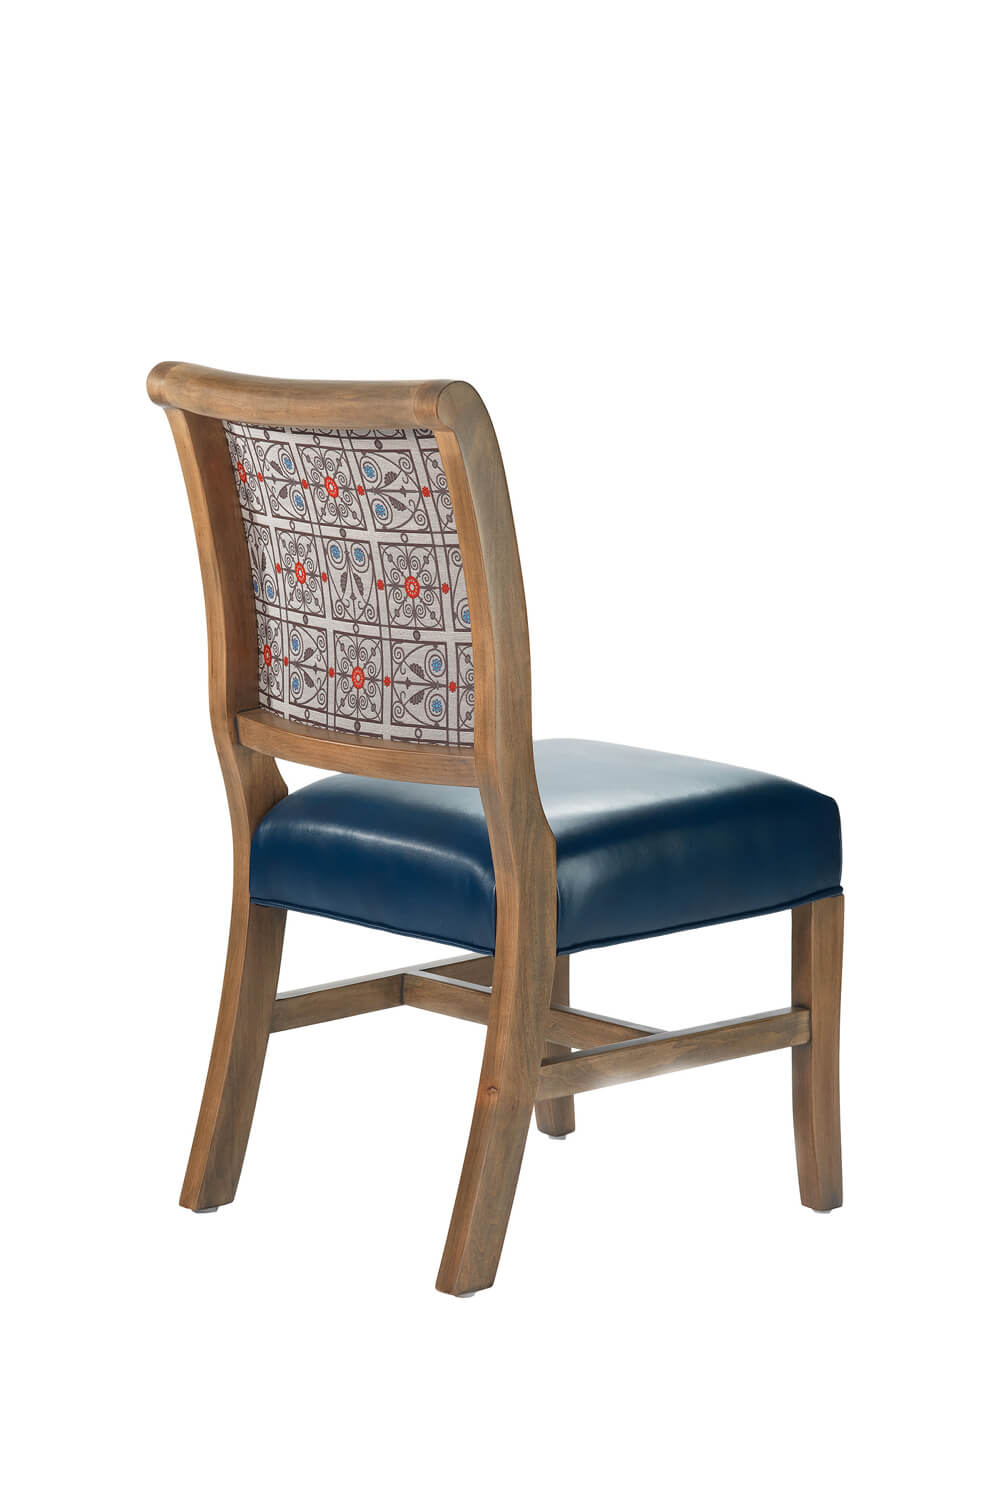 https://barstoolcomforts.com/wp-content/uploads/2020/09/darafeev-yorkshire-armless-dining-chair-with-blue-seat-cushion-pattern_view-of-back.jpg